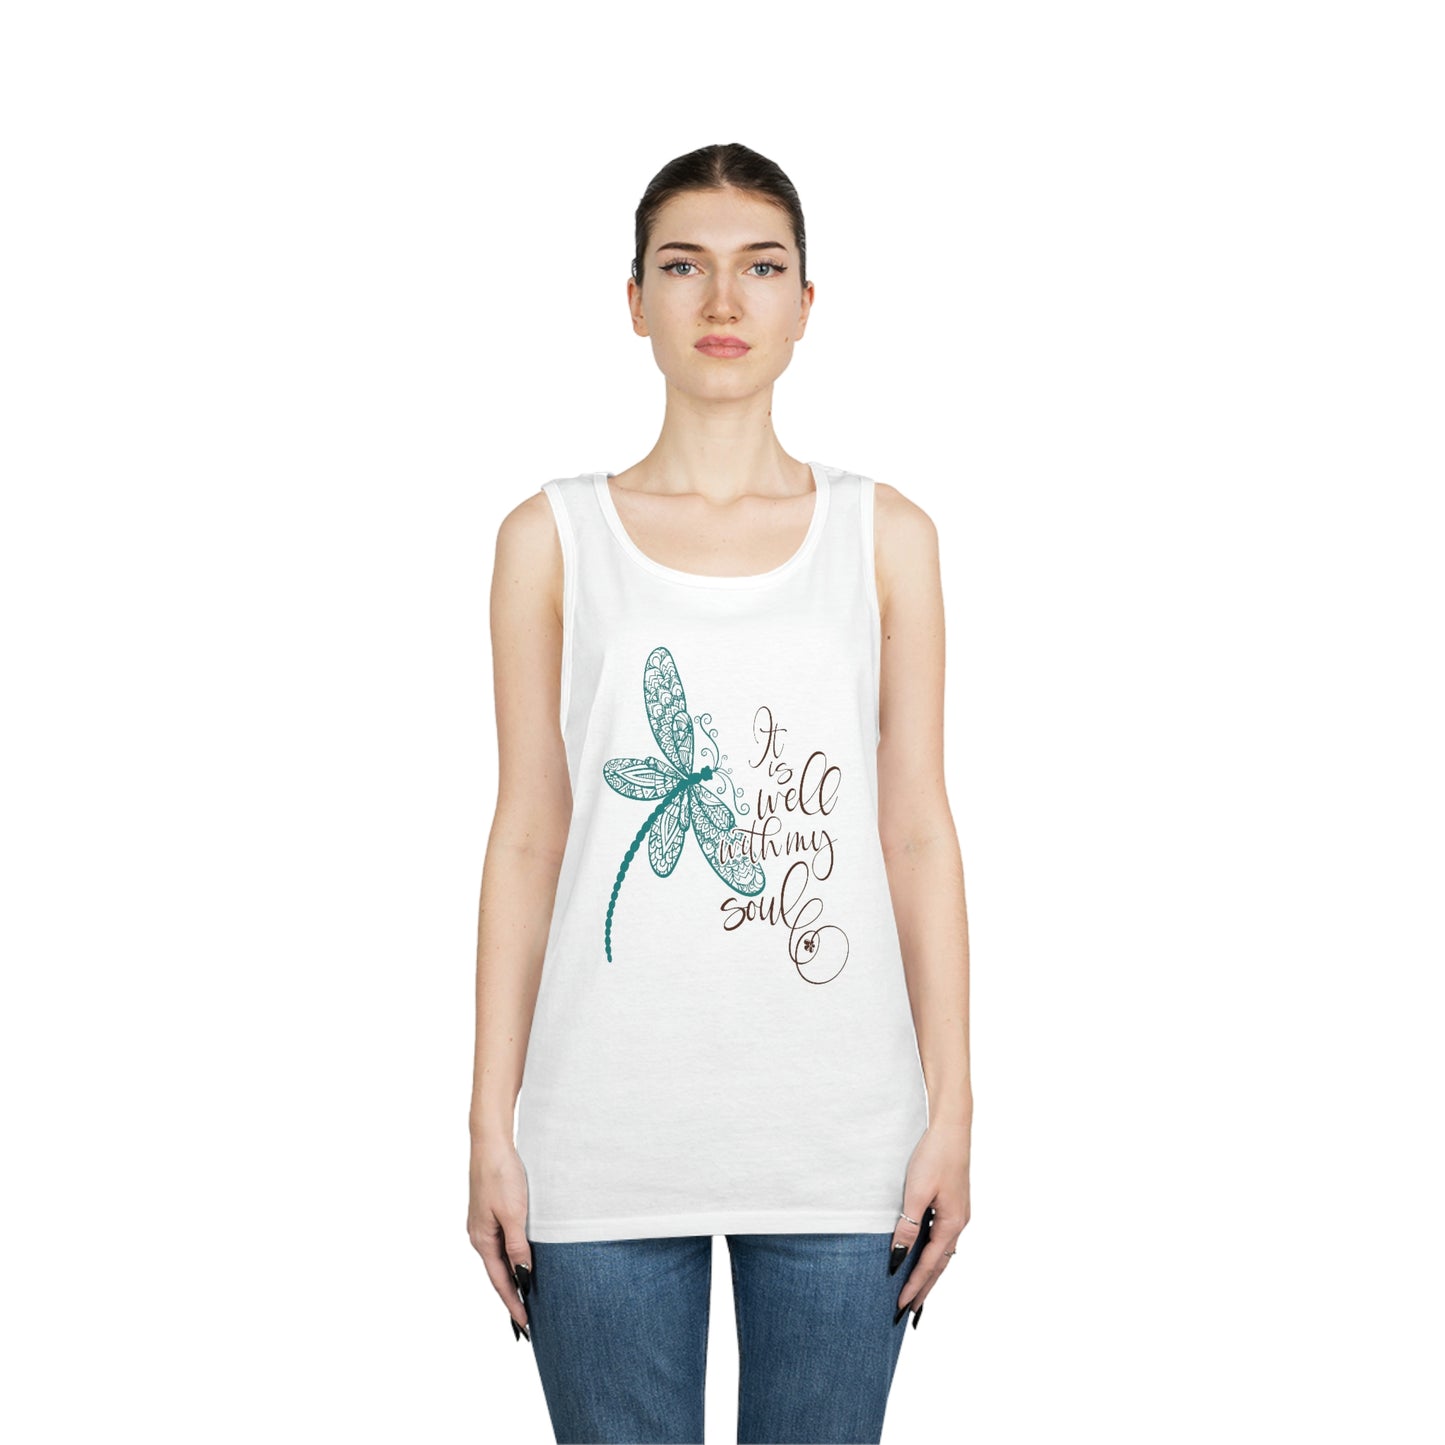 Blue Dragonfly Tank Top Summer Casual Wear Inspirational and Uplifting Sentiment for Women, Girls Lightweight, Perfect for Layering